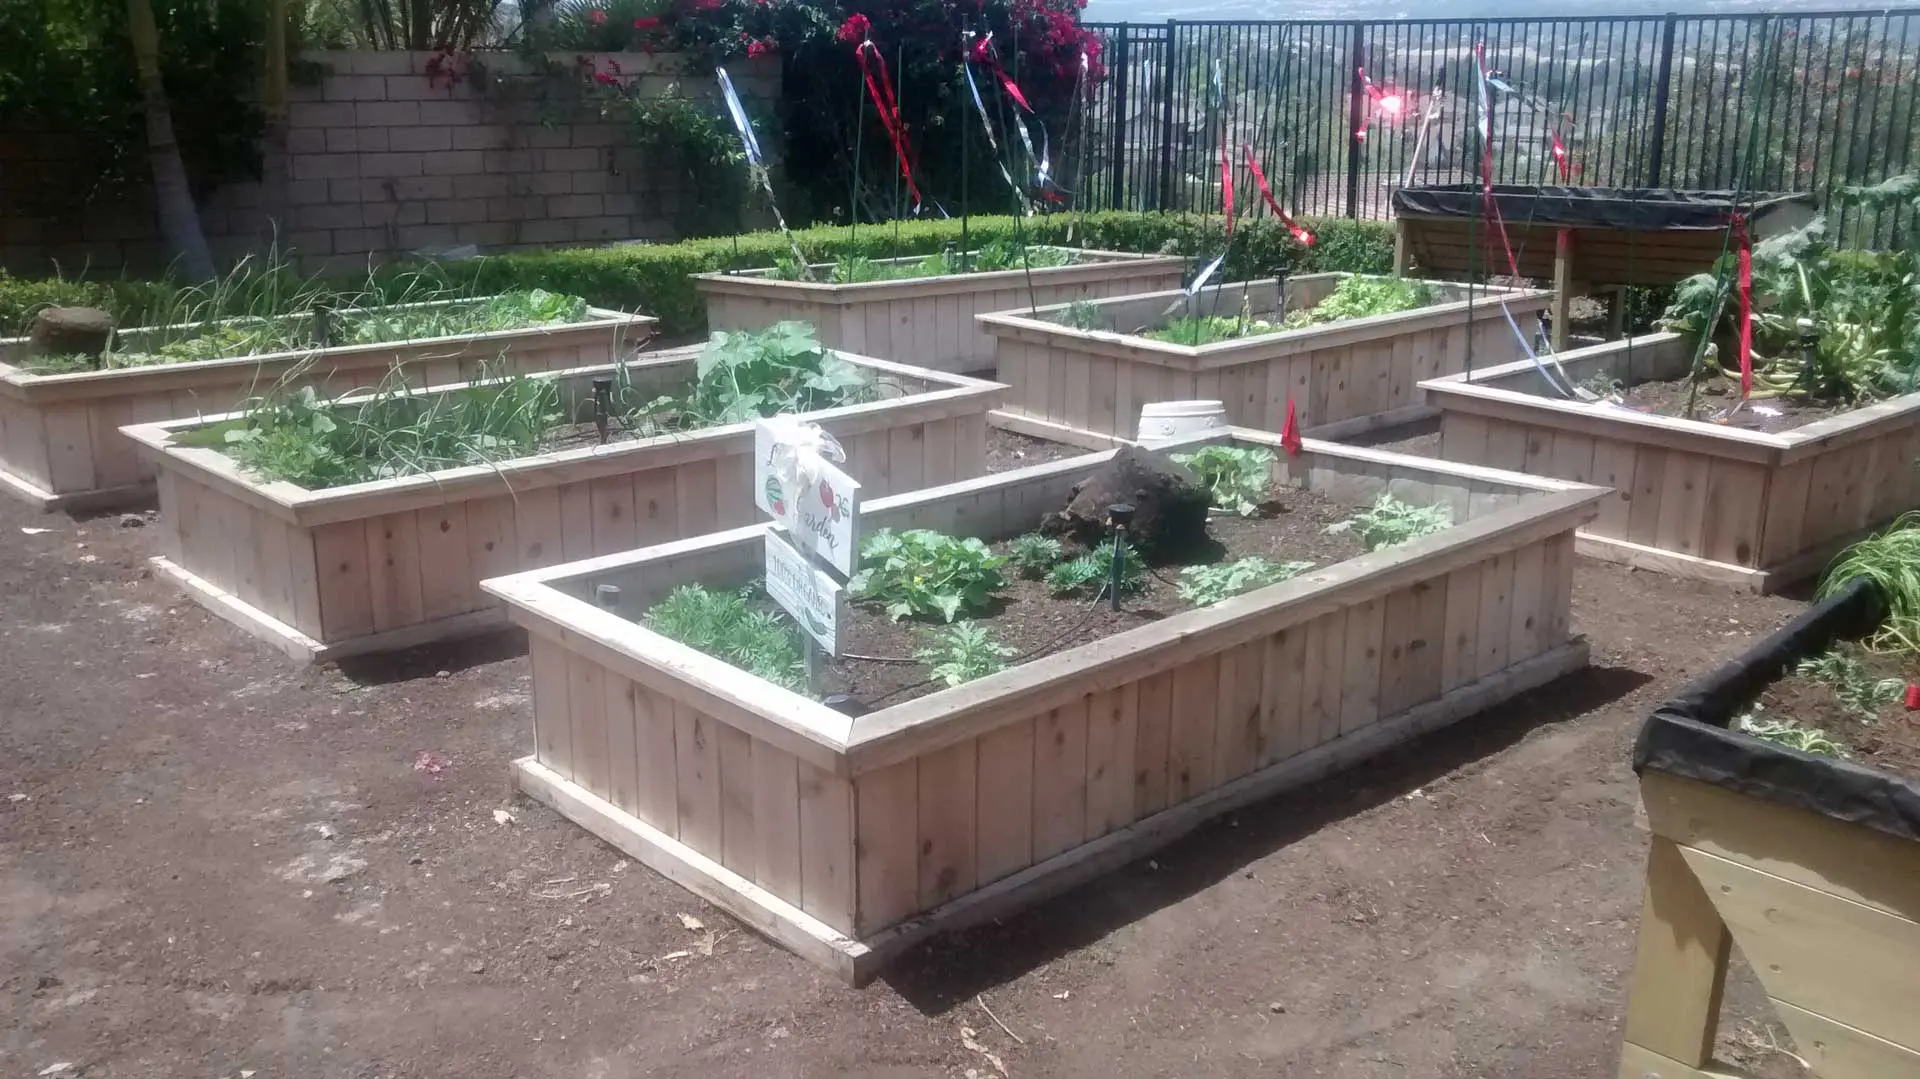 A group of raised garden beds in a dirt yard.